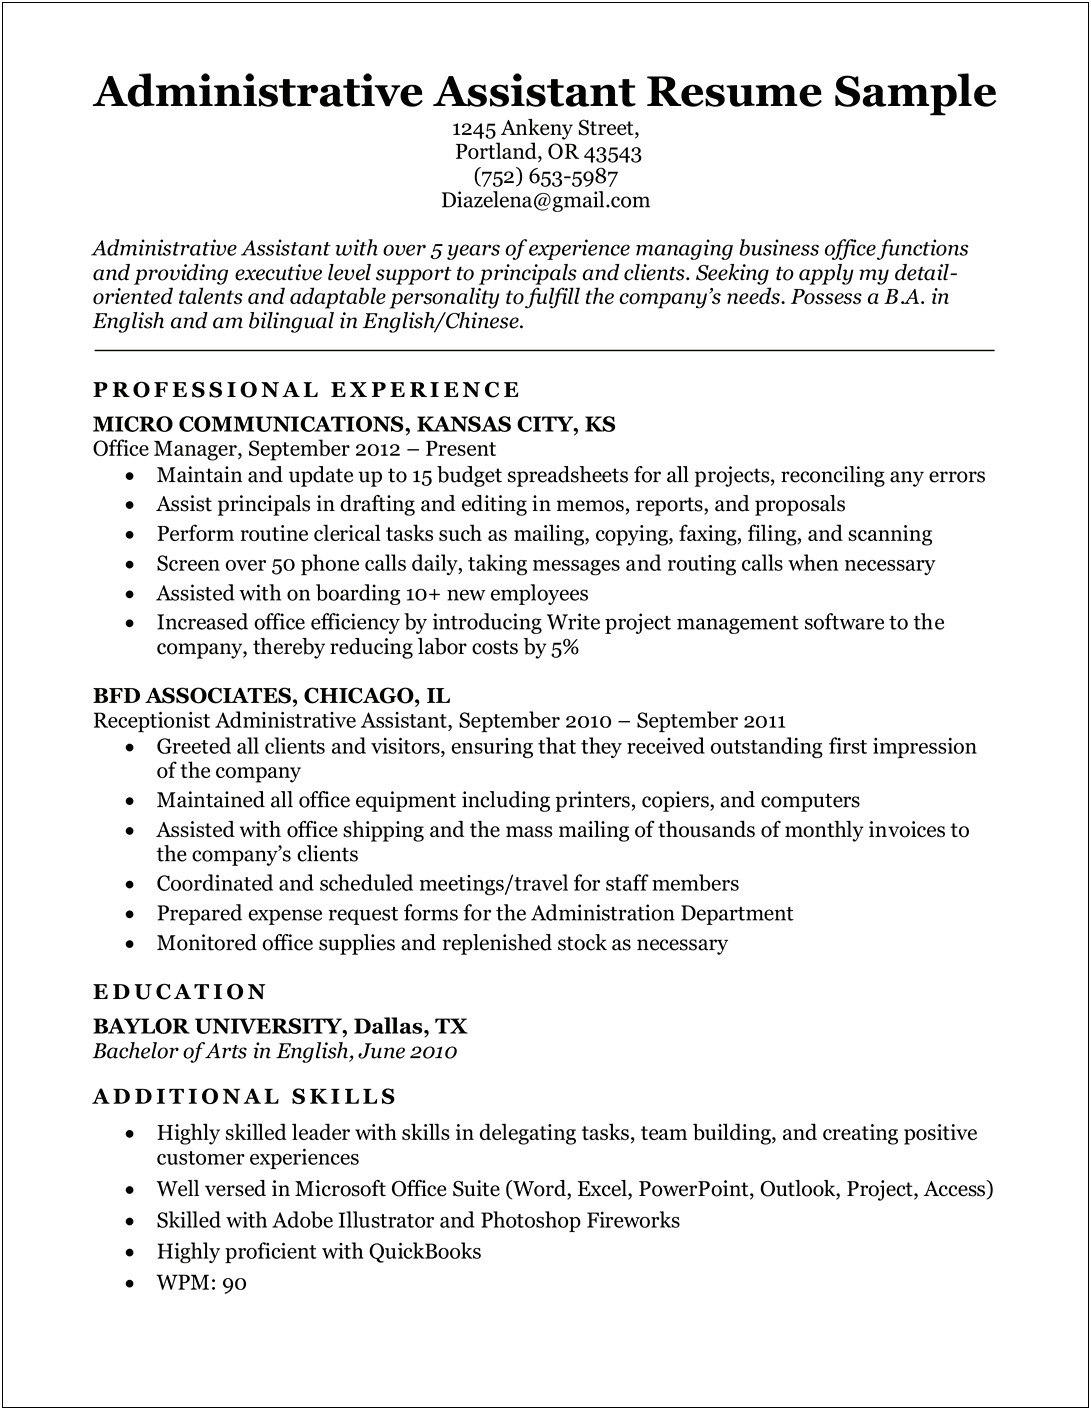 Claims Administrative Assistant Resume Sample